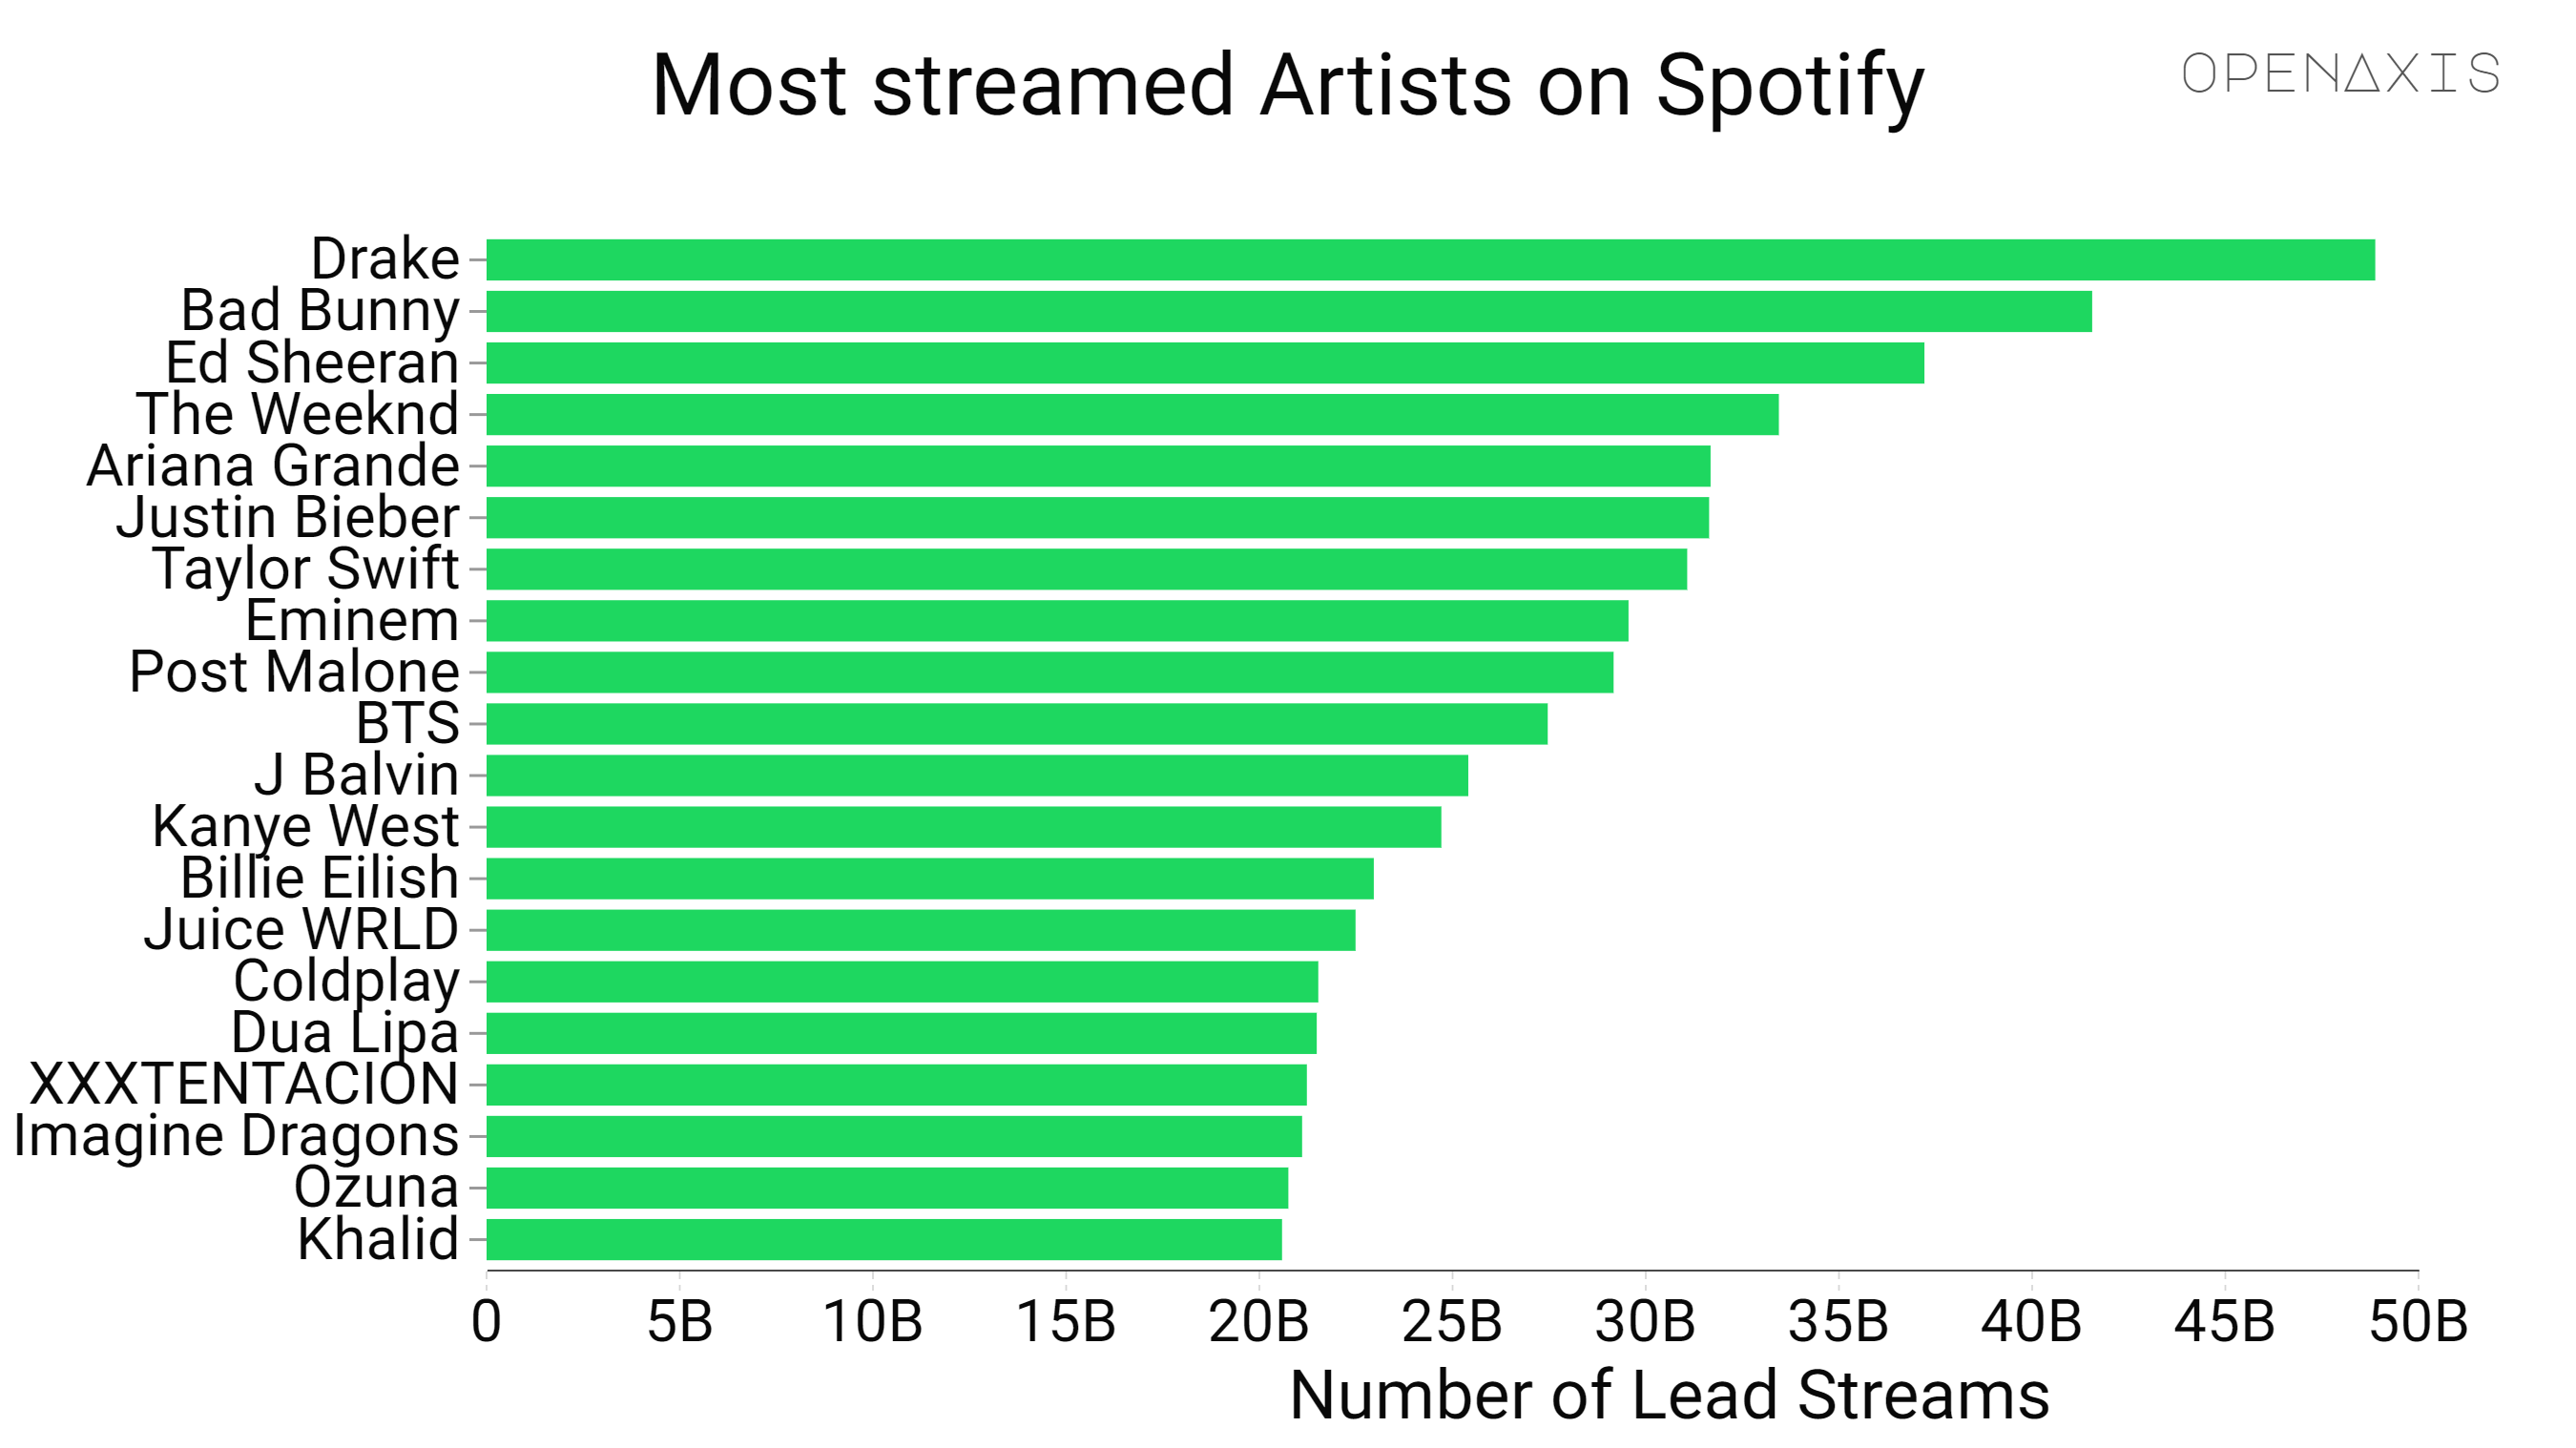 "Most streamed Artists on Spotify"